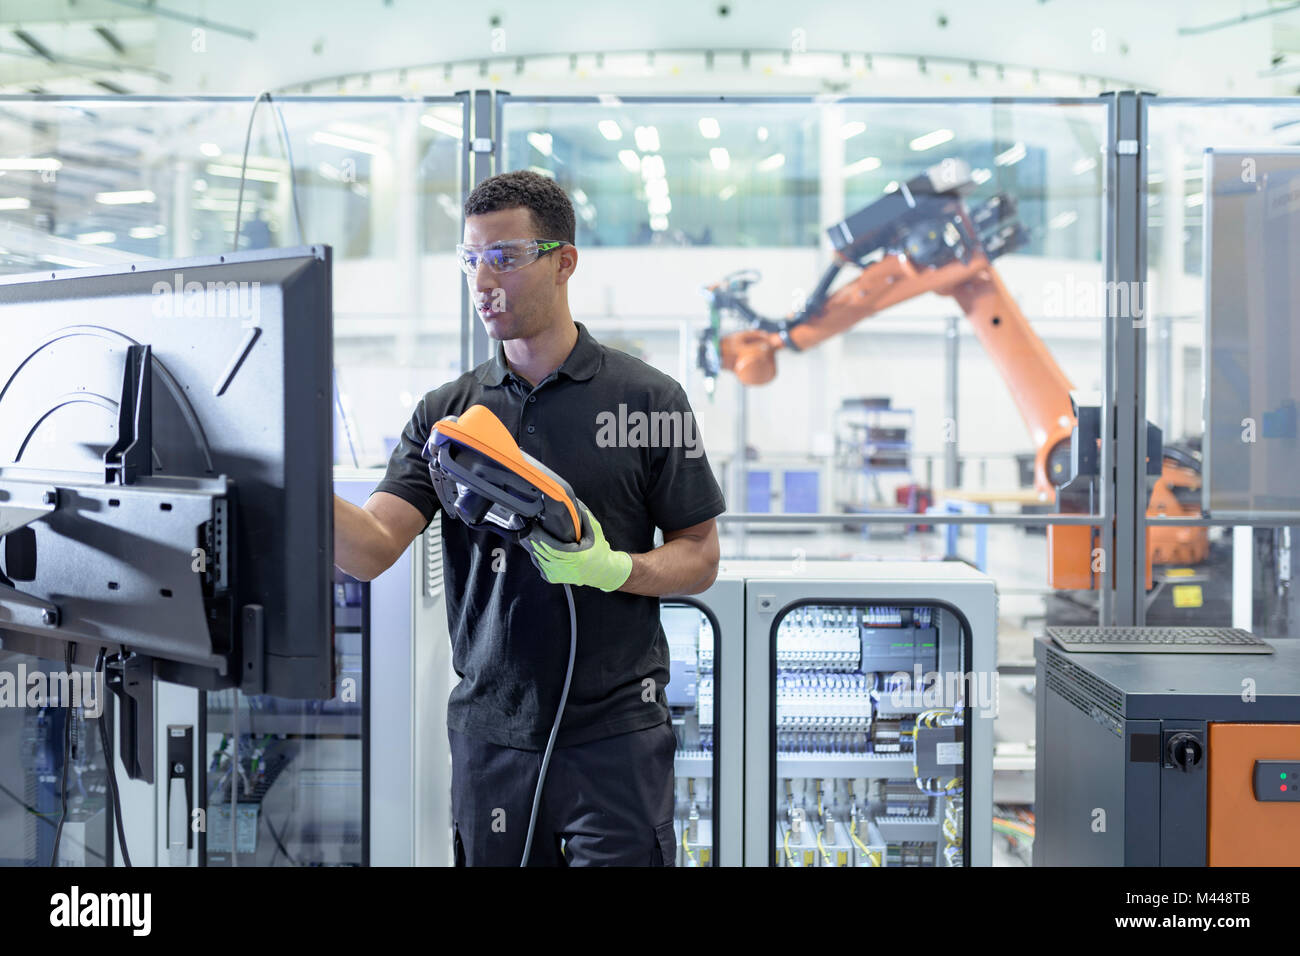 Ingenieur Programmierung Roboter in Robotics Research Facility Stockfoto